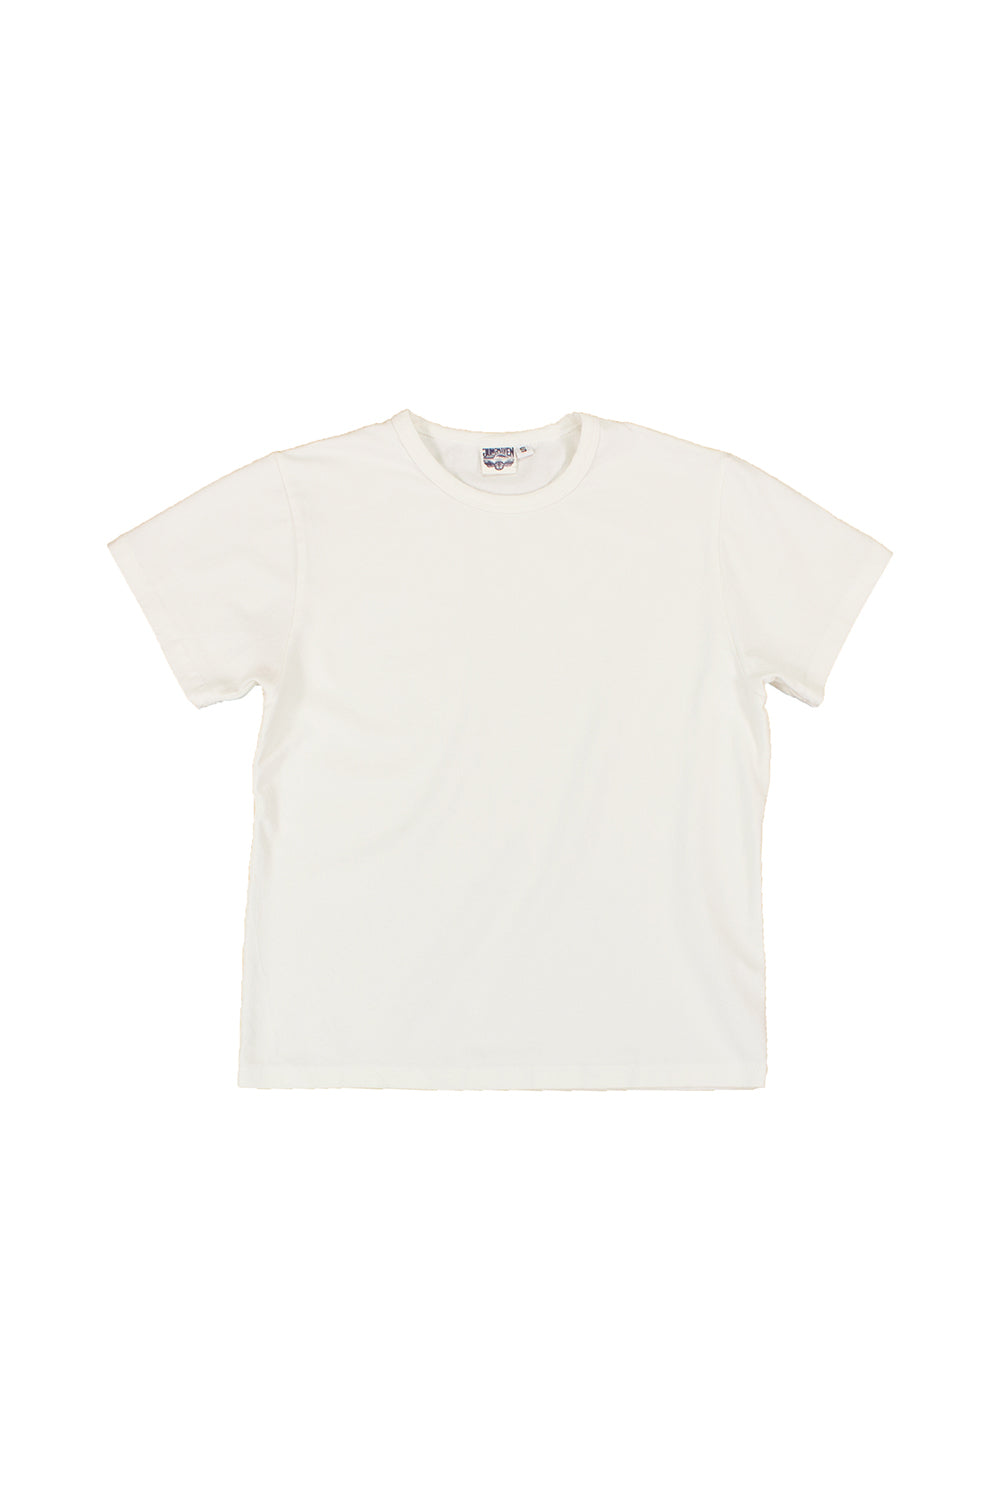 Tiny Tee | Jungmaven Hemp Clothing & Accessories / Color: Washed White